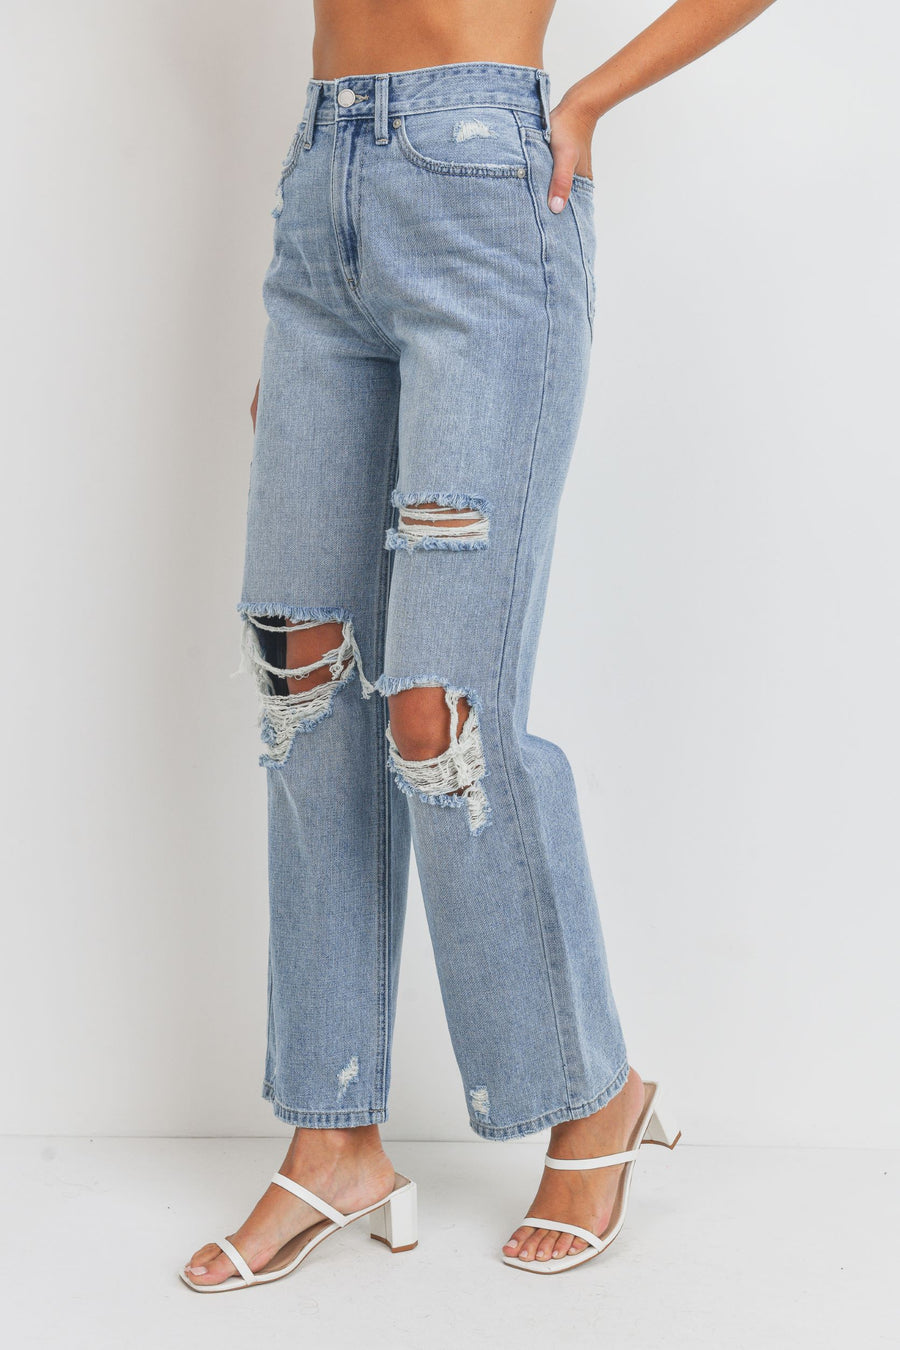 Loose fit jeans, high waisted, light denim with rips across the knees.